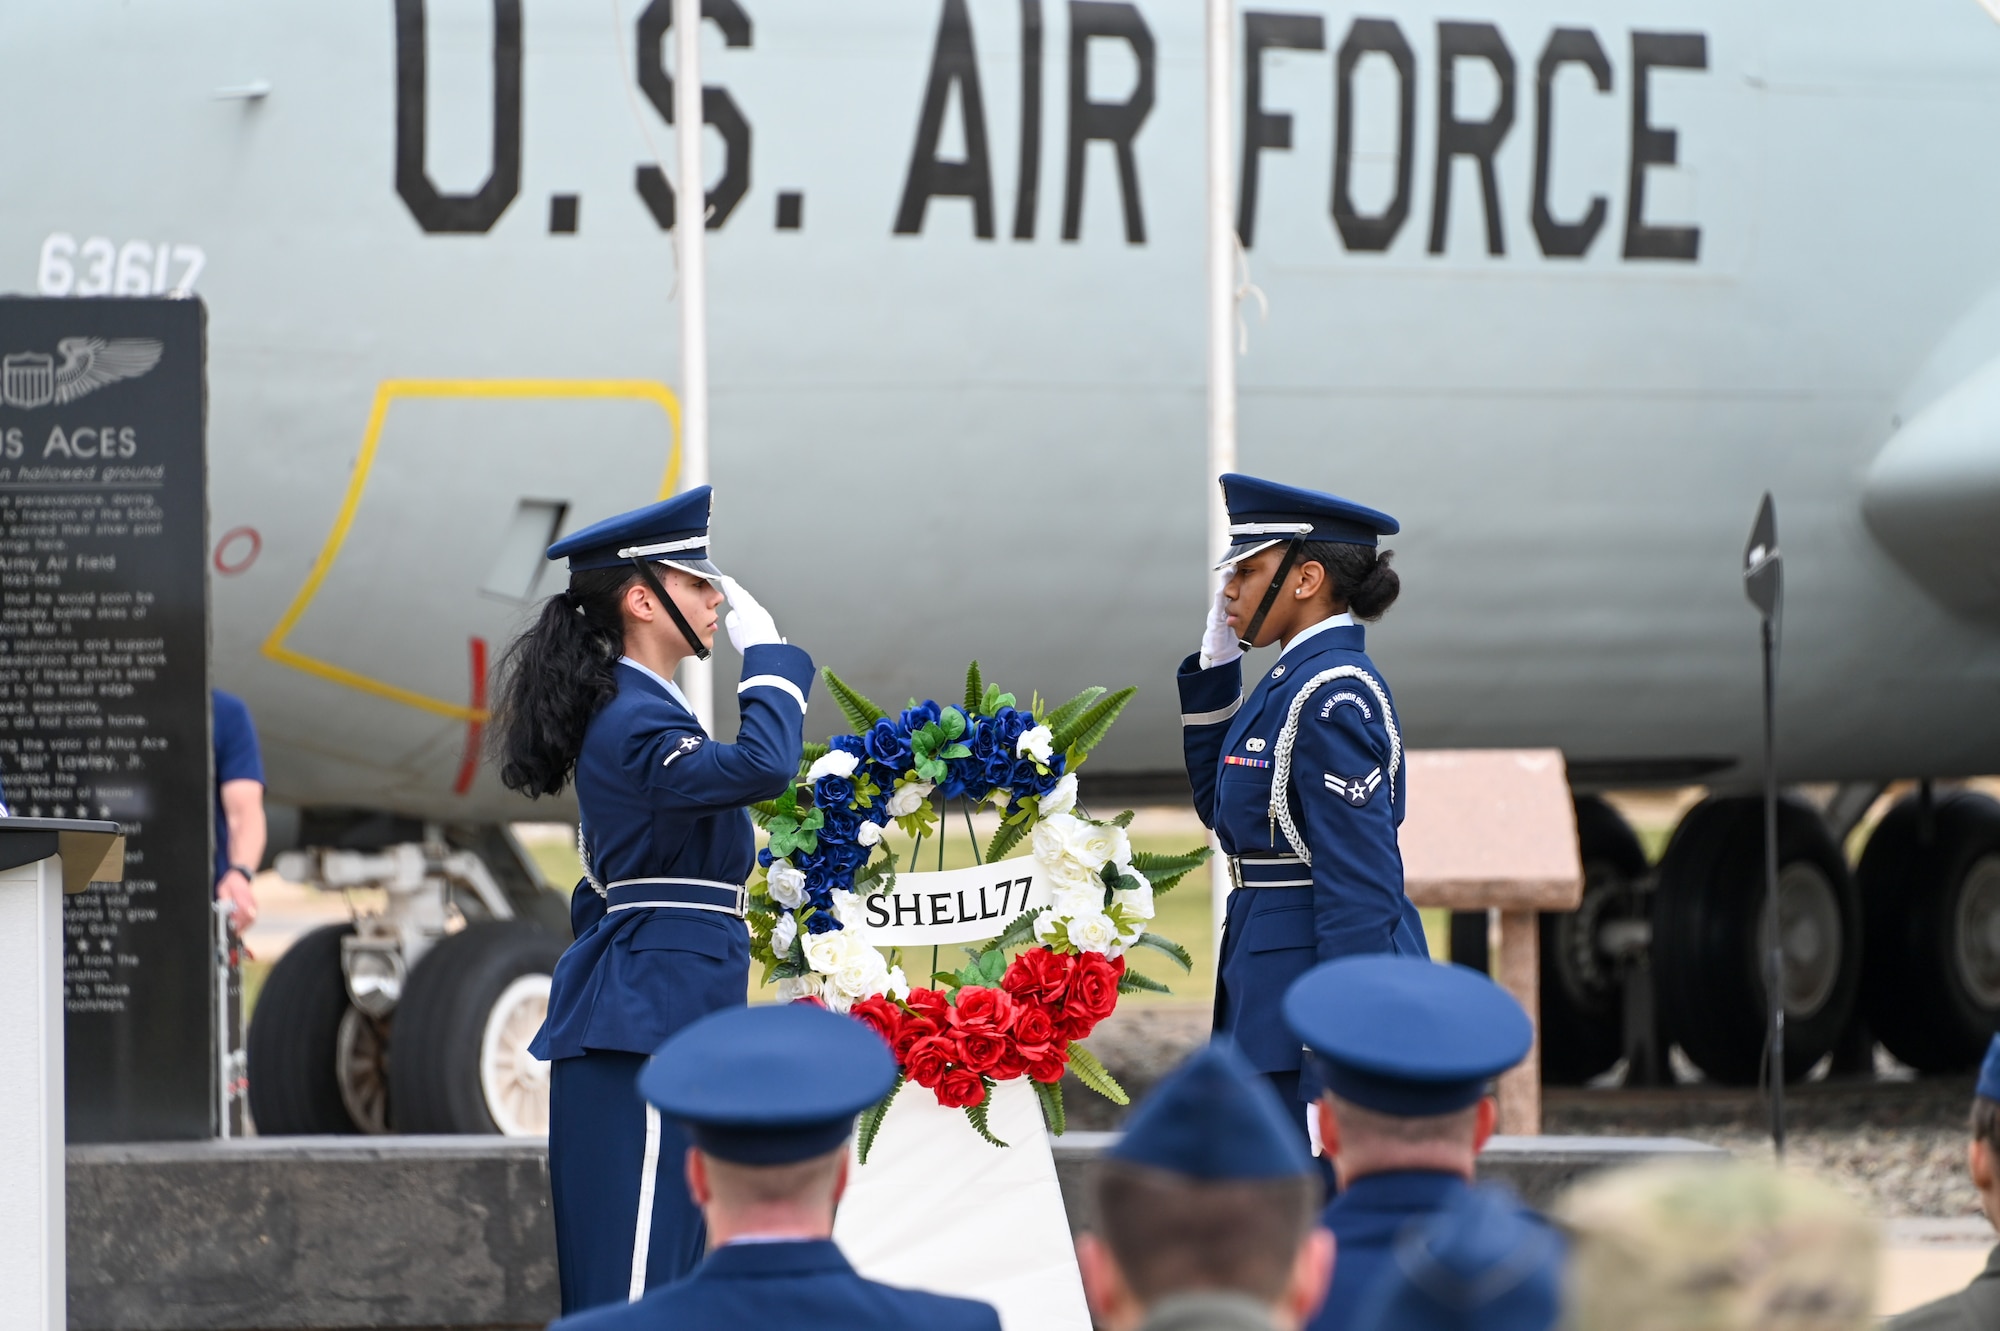 The Blue Knights Honor Guard salutes during a wreath laying for the Shell 77 memorial at Altus Air Force Base, Oklahoma, May 3, 2023. A KC-135 Stratotanker with the call sign “Shell 77” crashed ten years ago. (U.S. Air Force photo by Senior Airman Kayla Christenson)